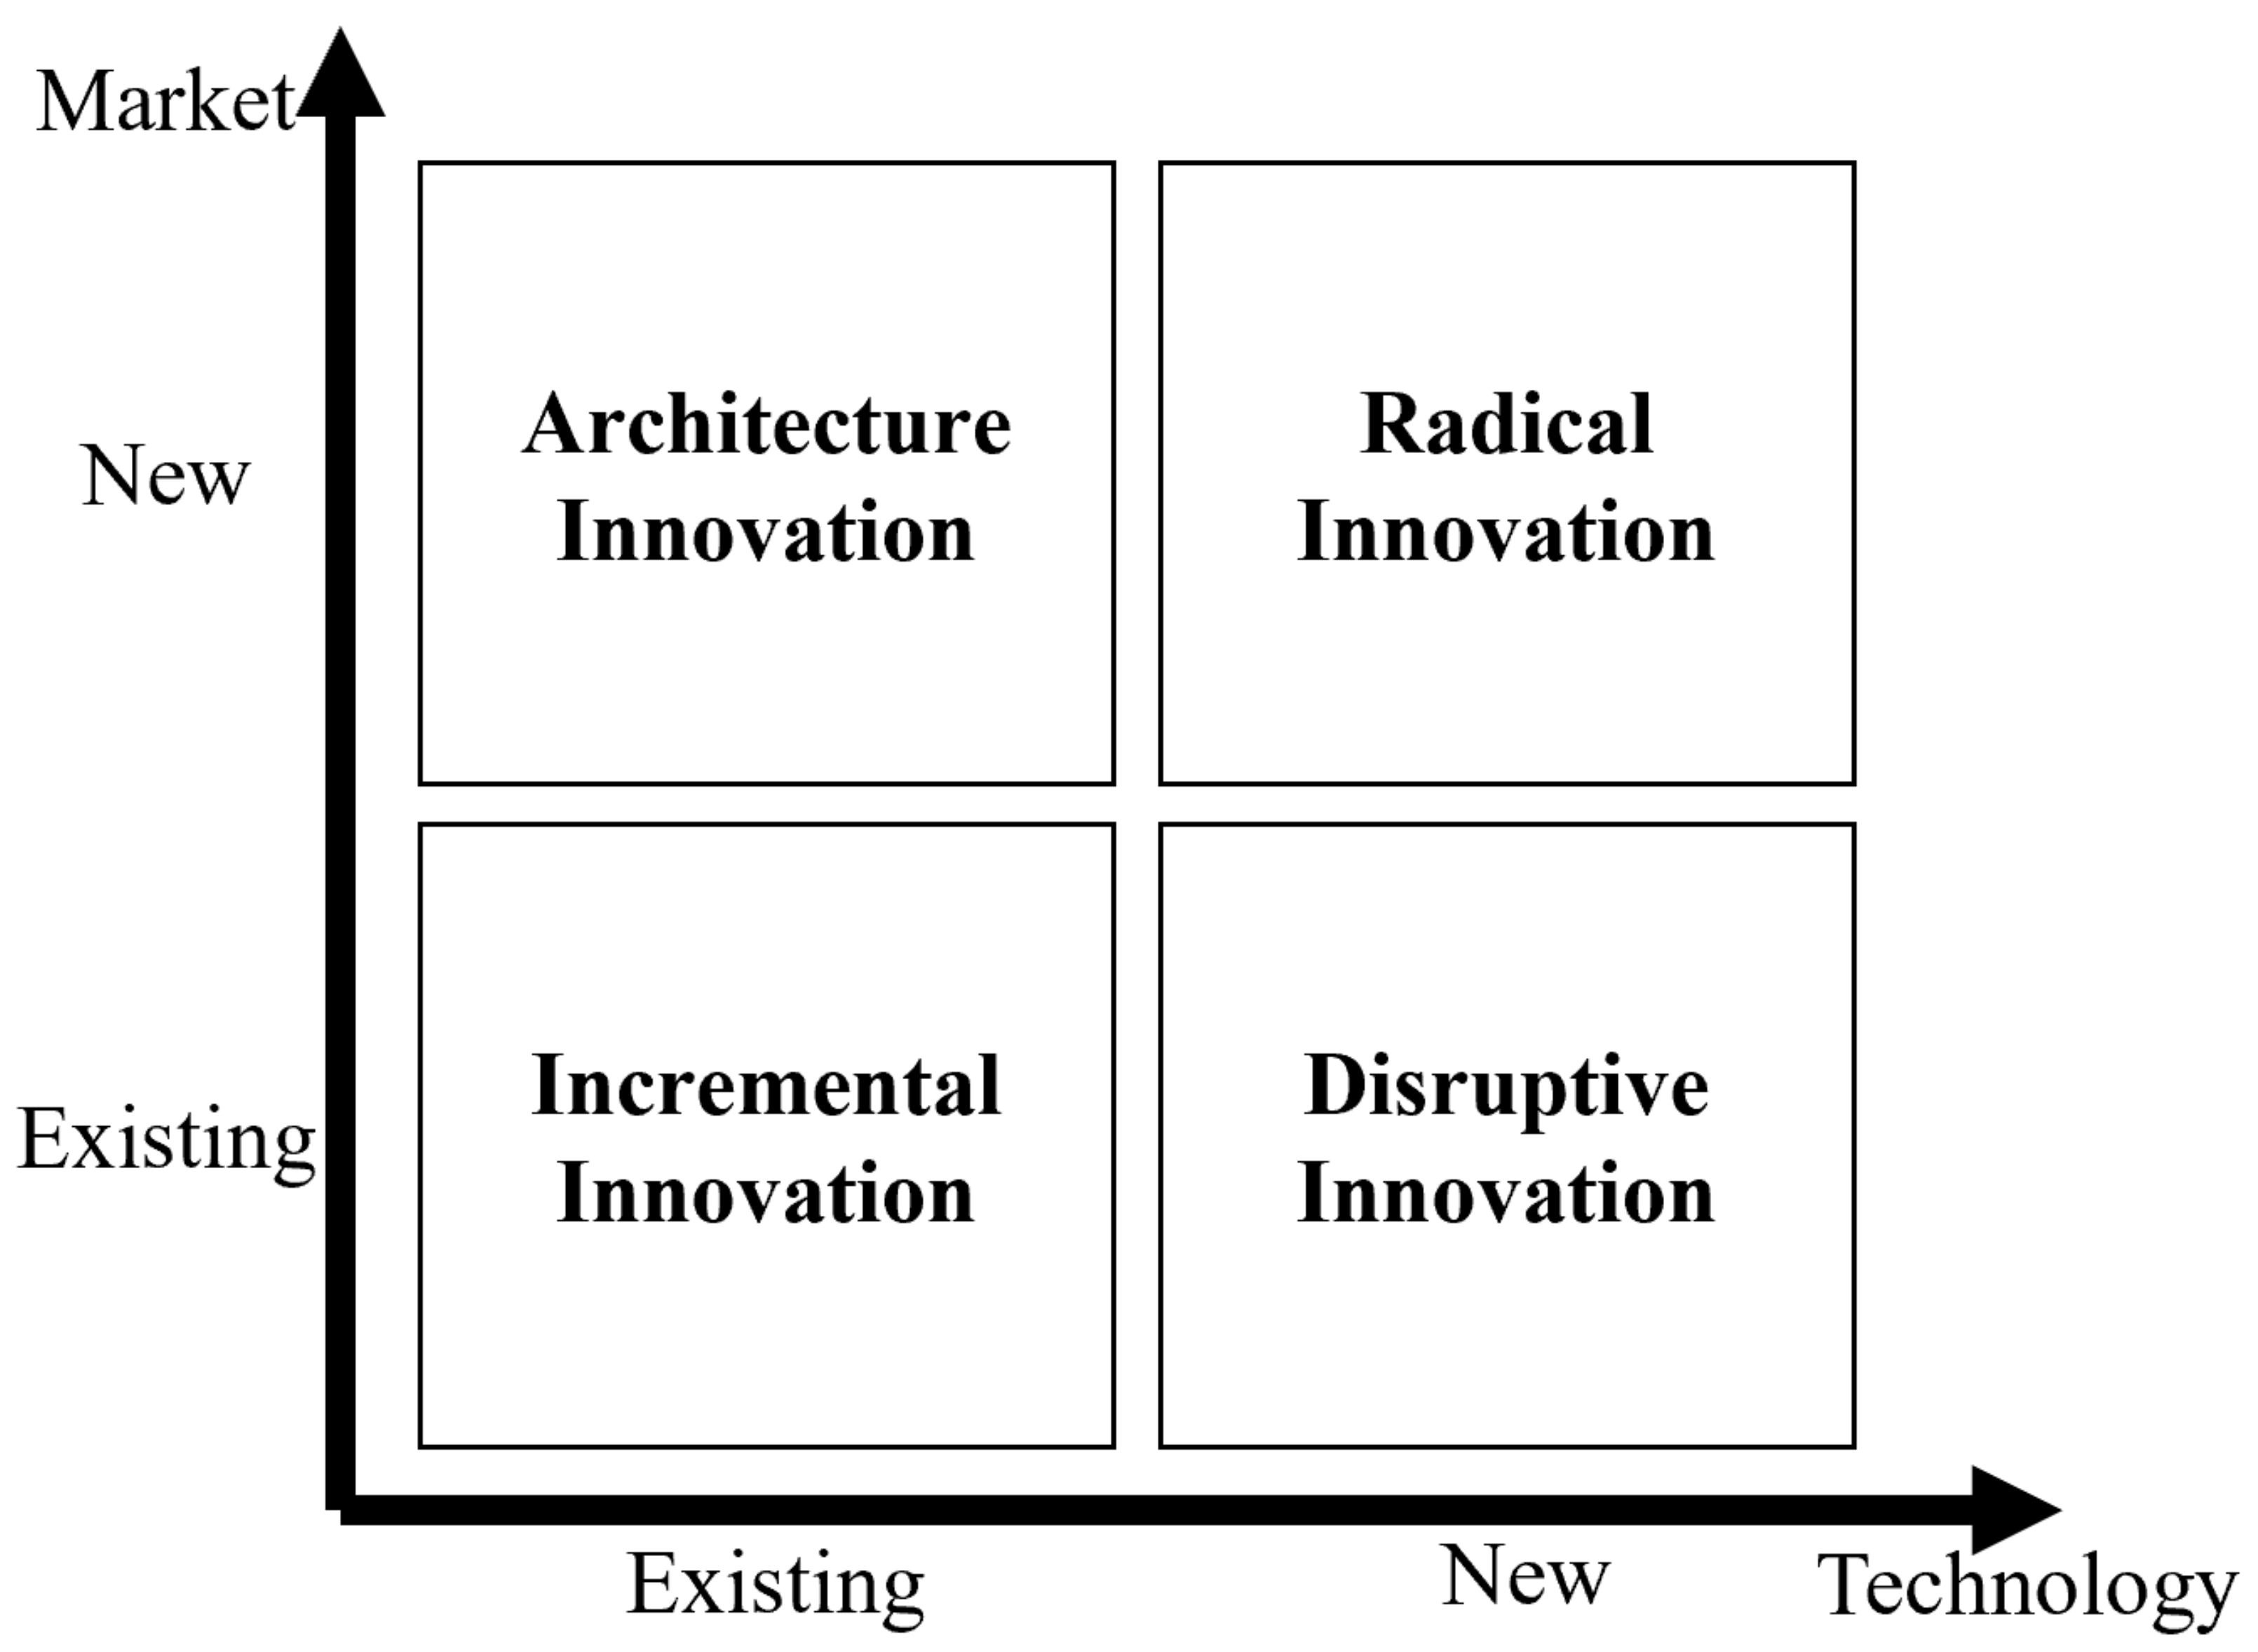 What is radical innovation?